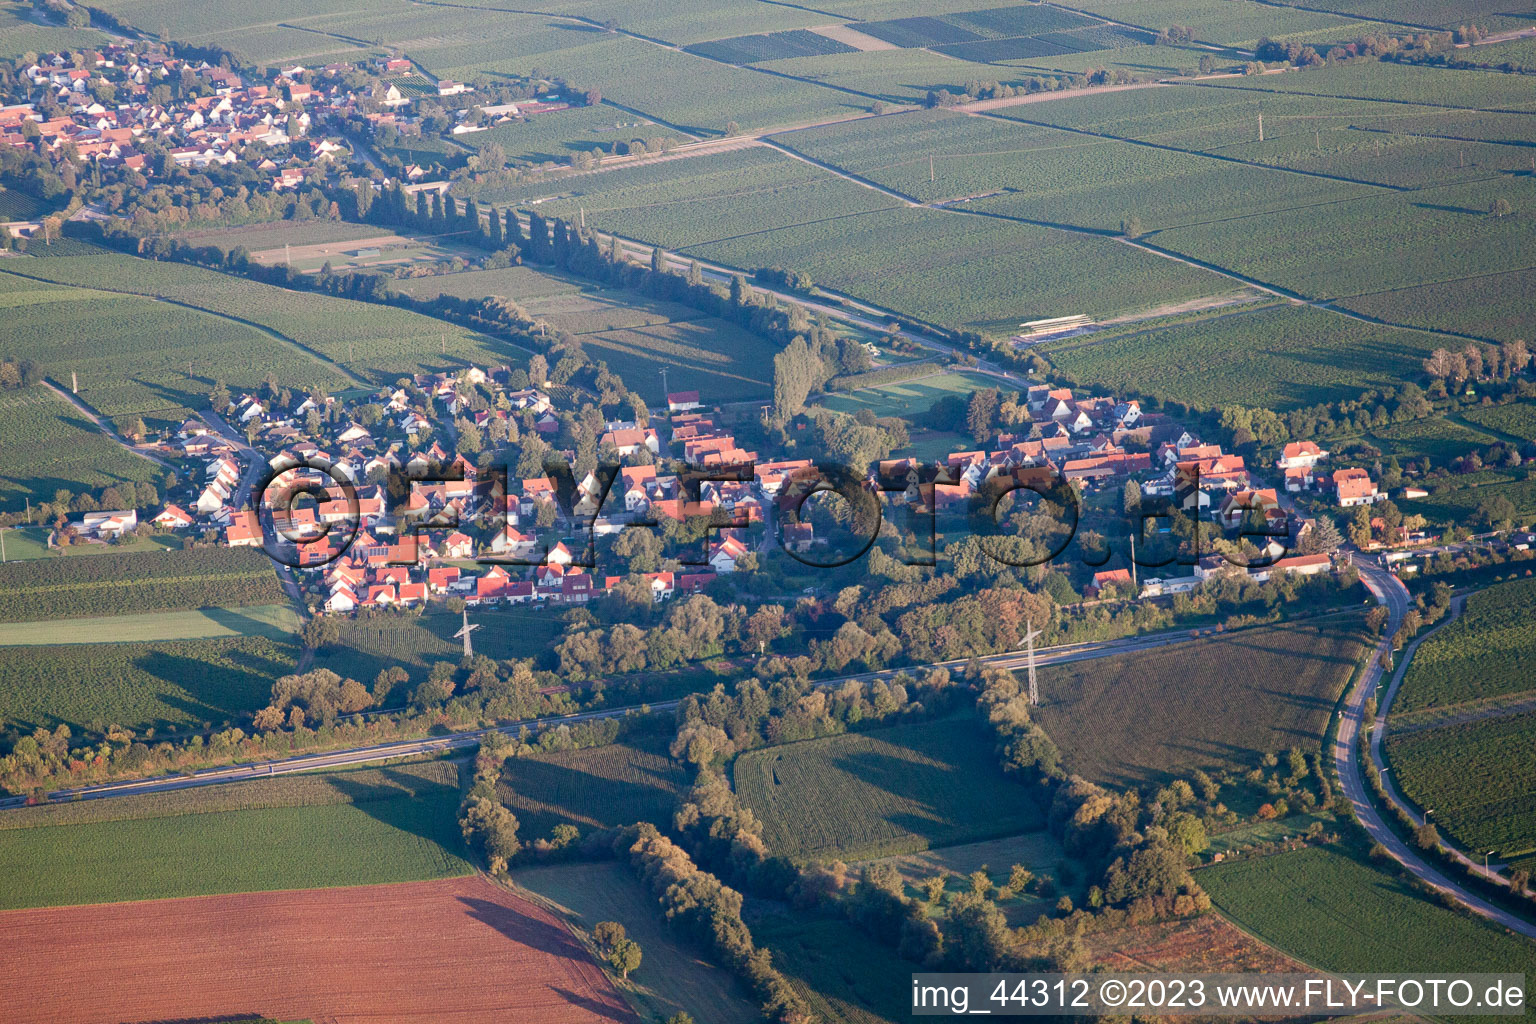 Essingen in the state Rhineland-Palatinate, Germany out of the air